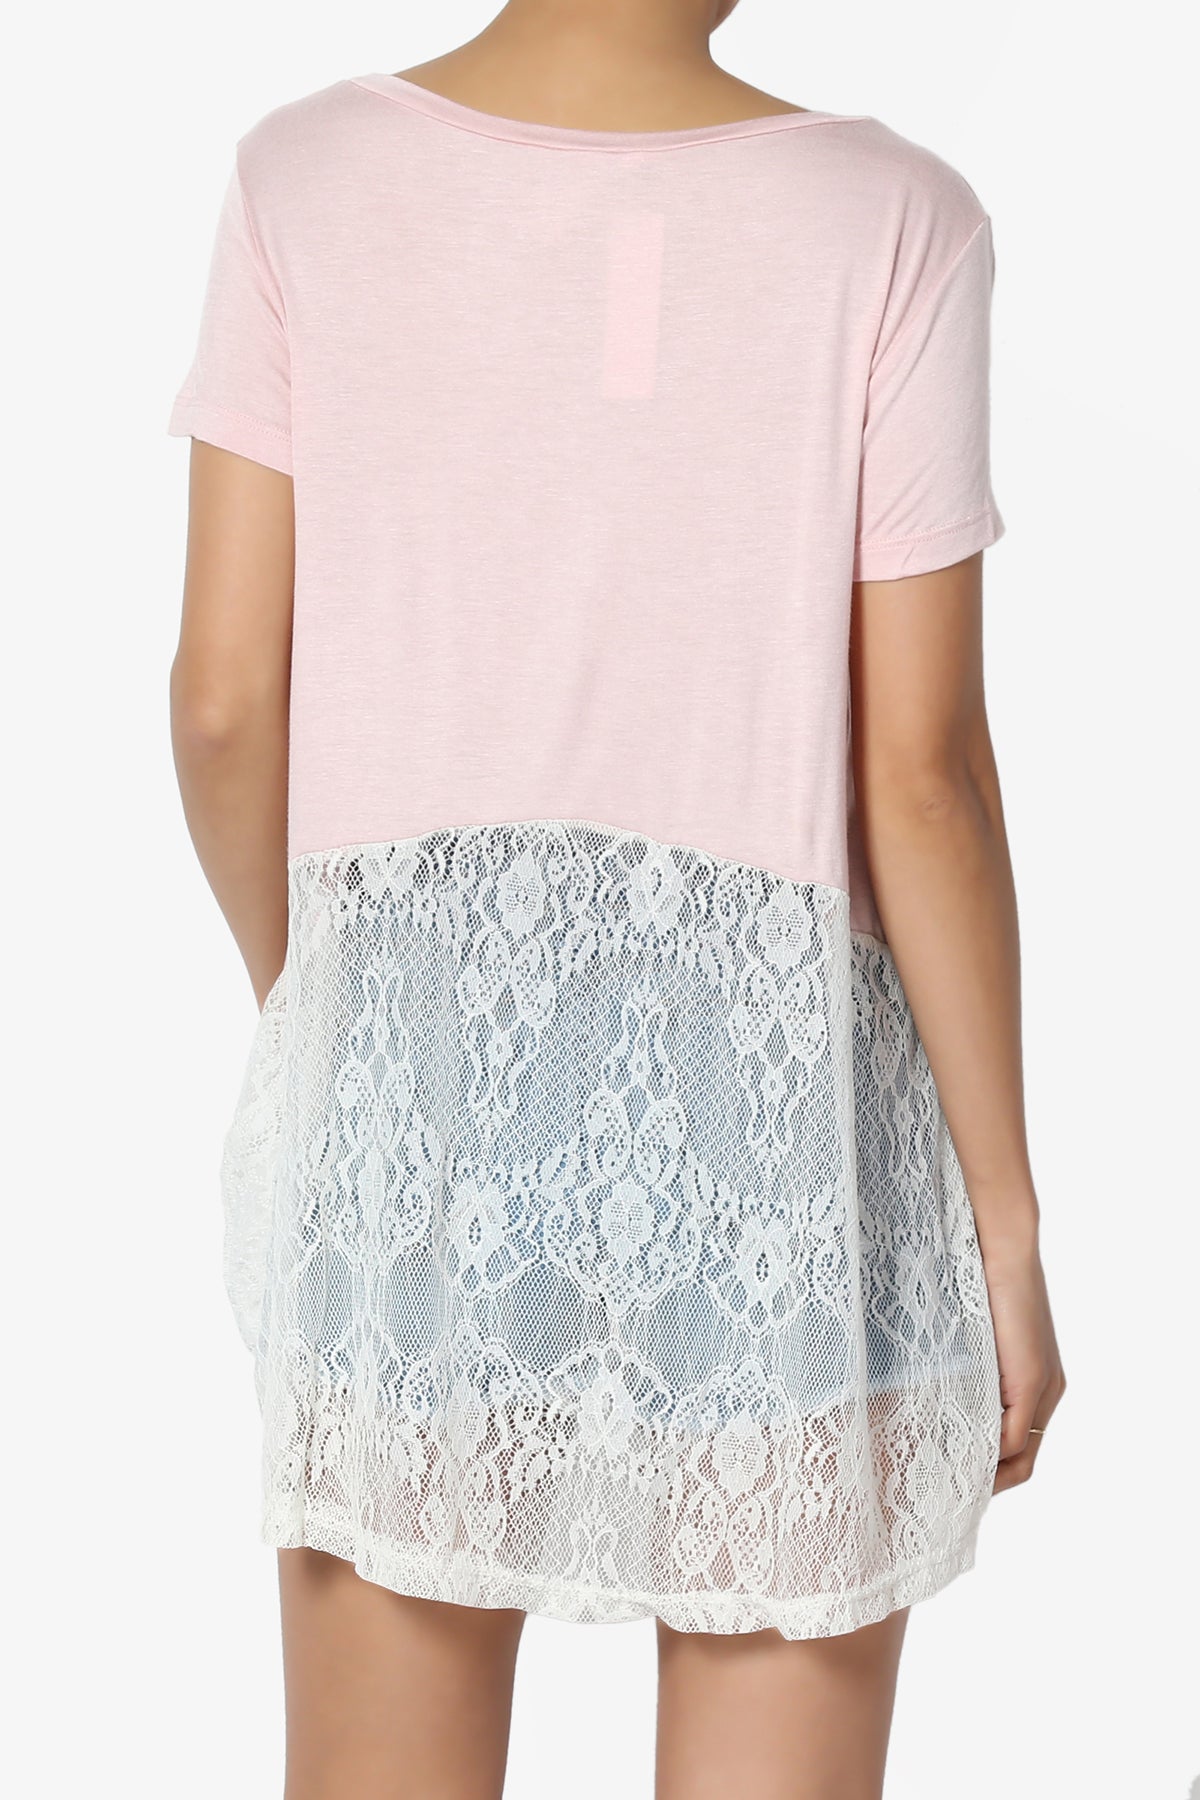 Chloe Lace Back Short Sleeve Jersey Tee CANDY PINK_2